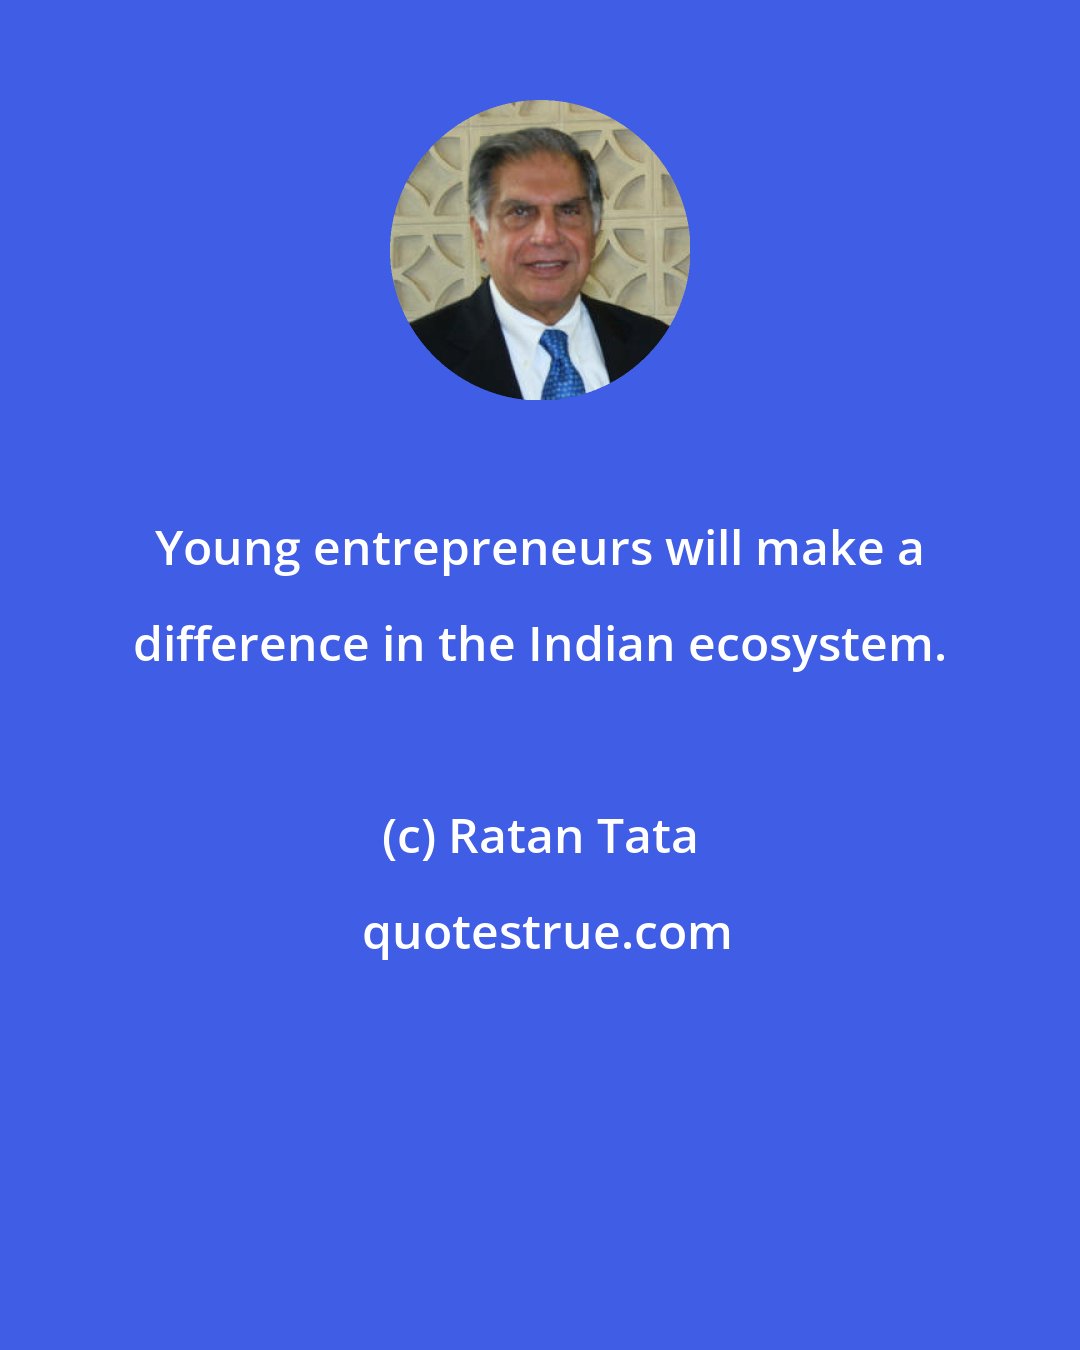 Ratan Tata: Young entrepreneurs will make a difference in the Indian ecosystem.